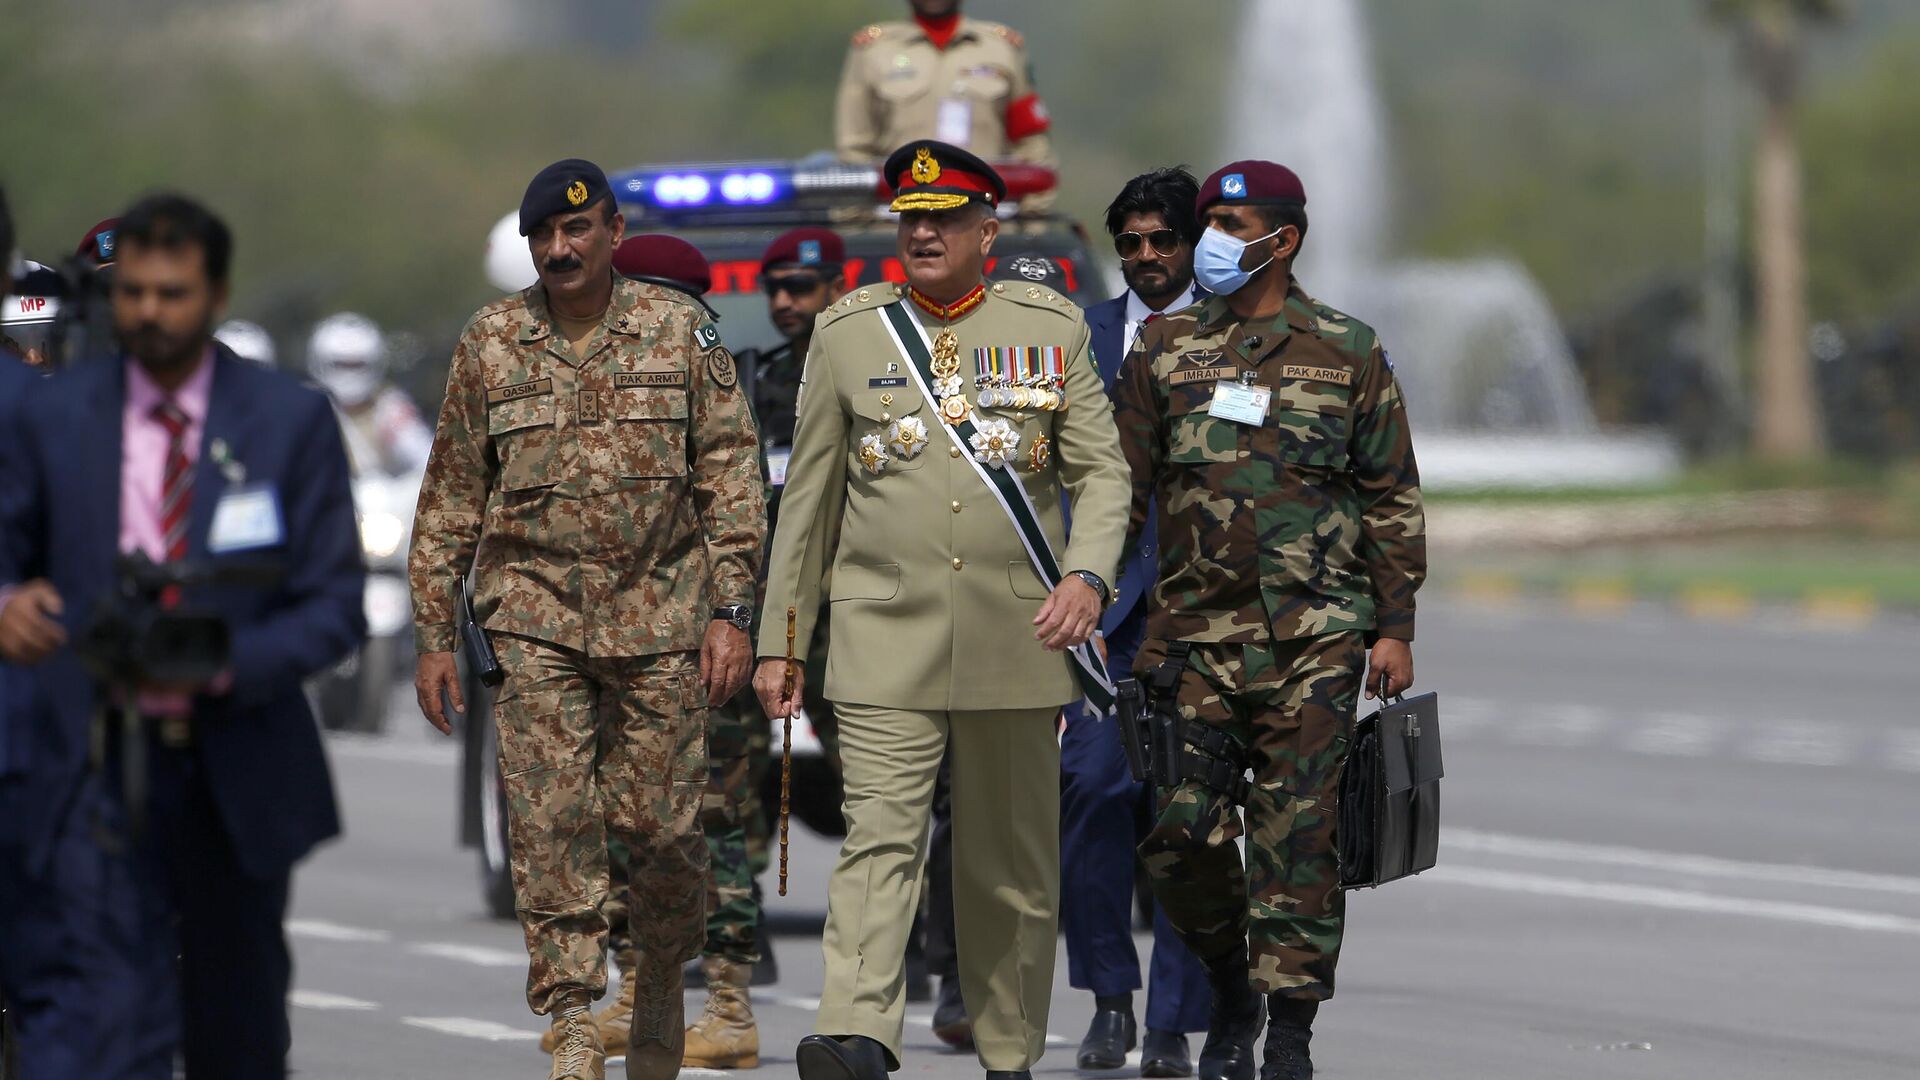 Pakistan's Army Chief General Qamar Javed Bajwa attends a military parade to mark Pakistan National Day in Islamabad, Pakistan, Wednesday, March 23, 2022.  - Sputnik International, 1920, 02.04.2022